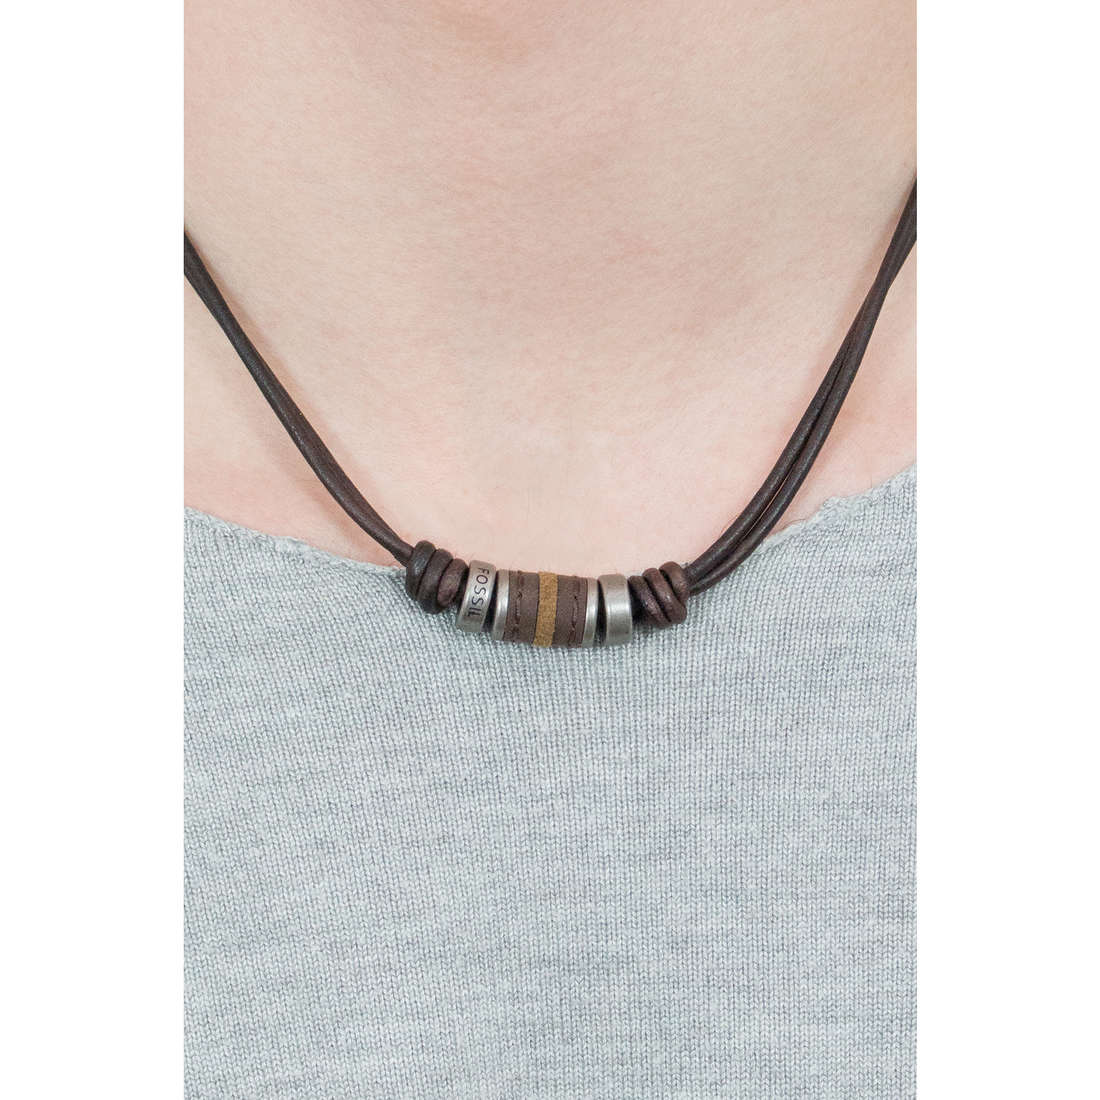 Fossil necklaces Fall 2013 man JF00899797 wearing